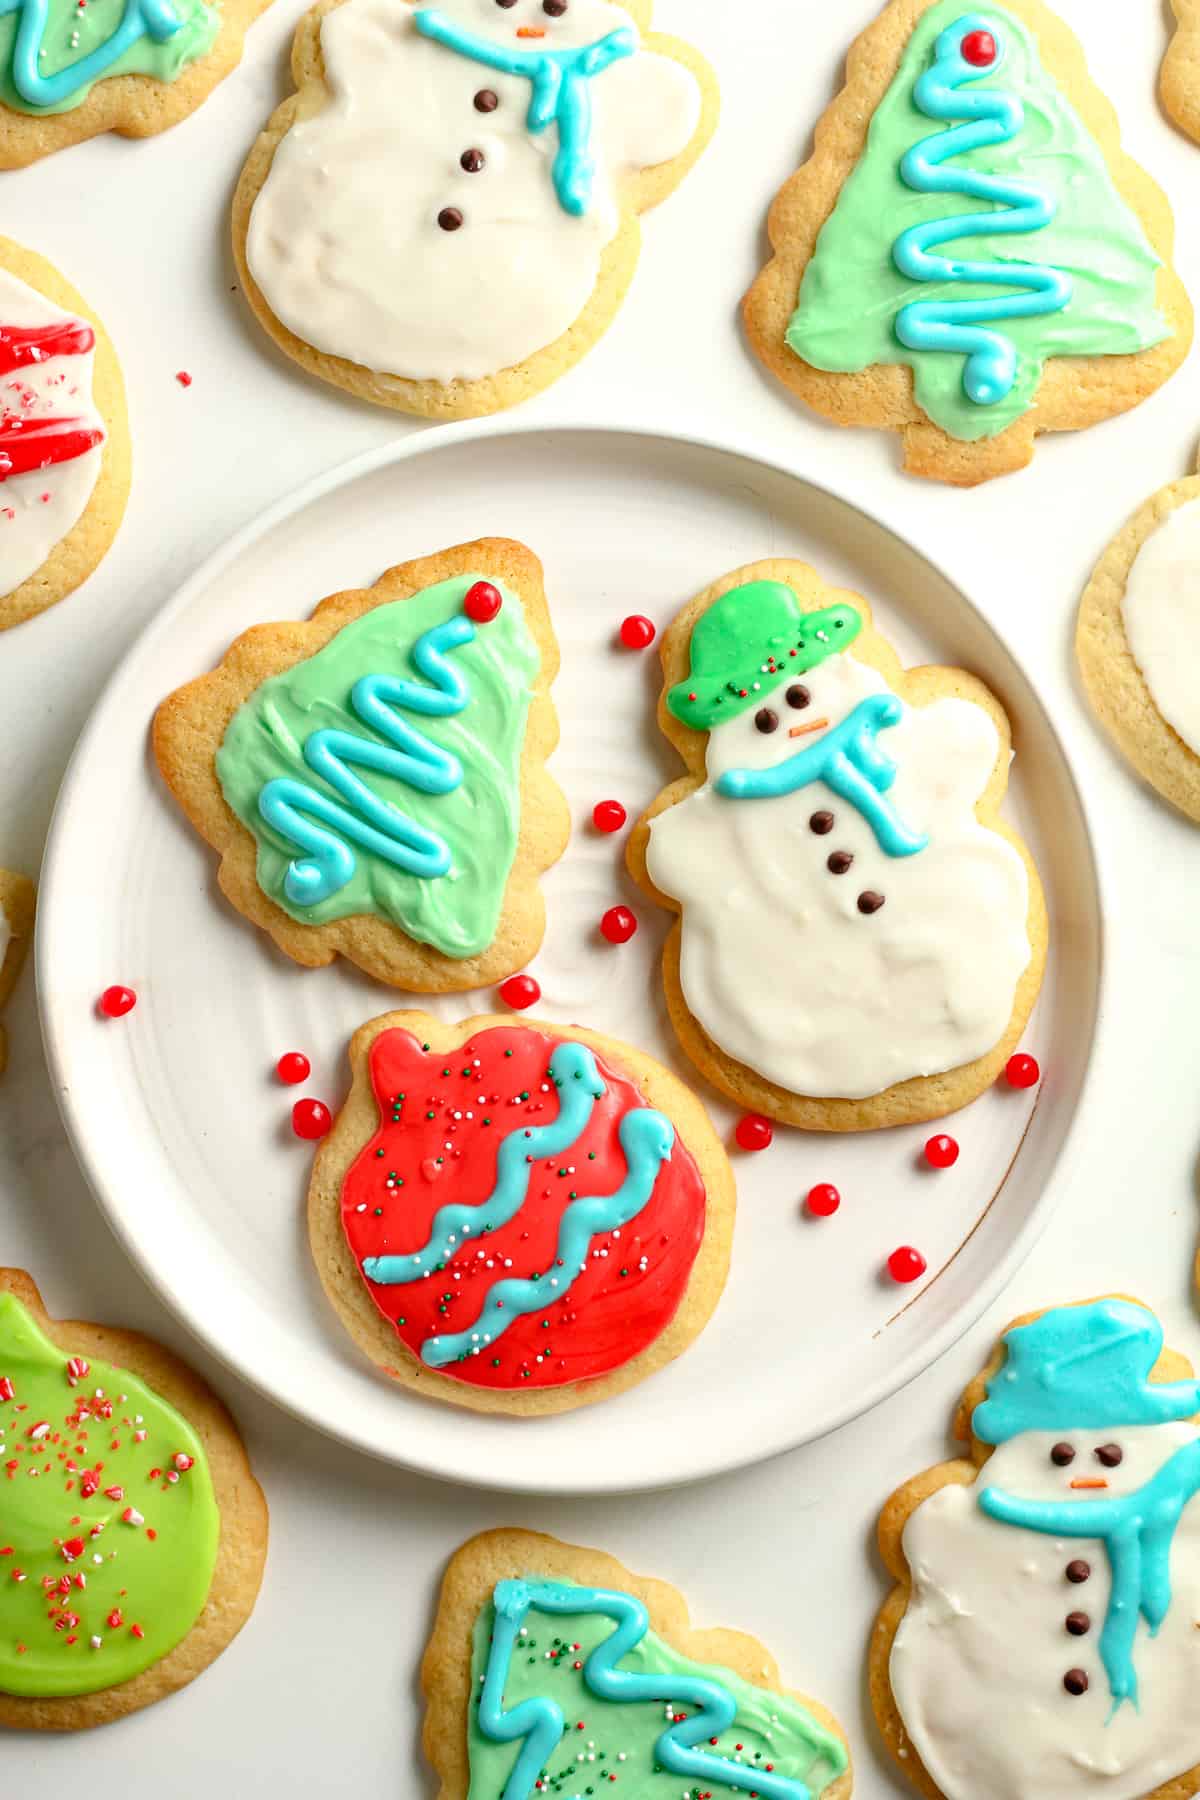 A plate of decorated cookies with other cookies around it.